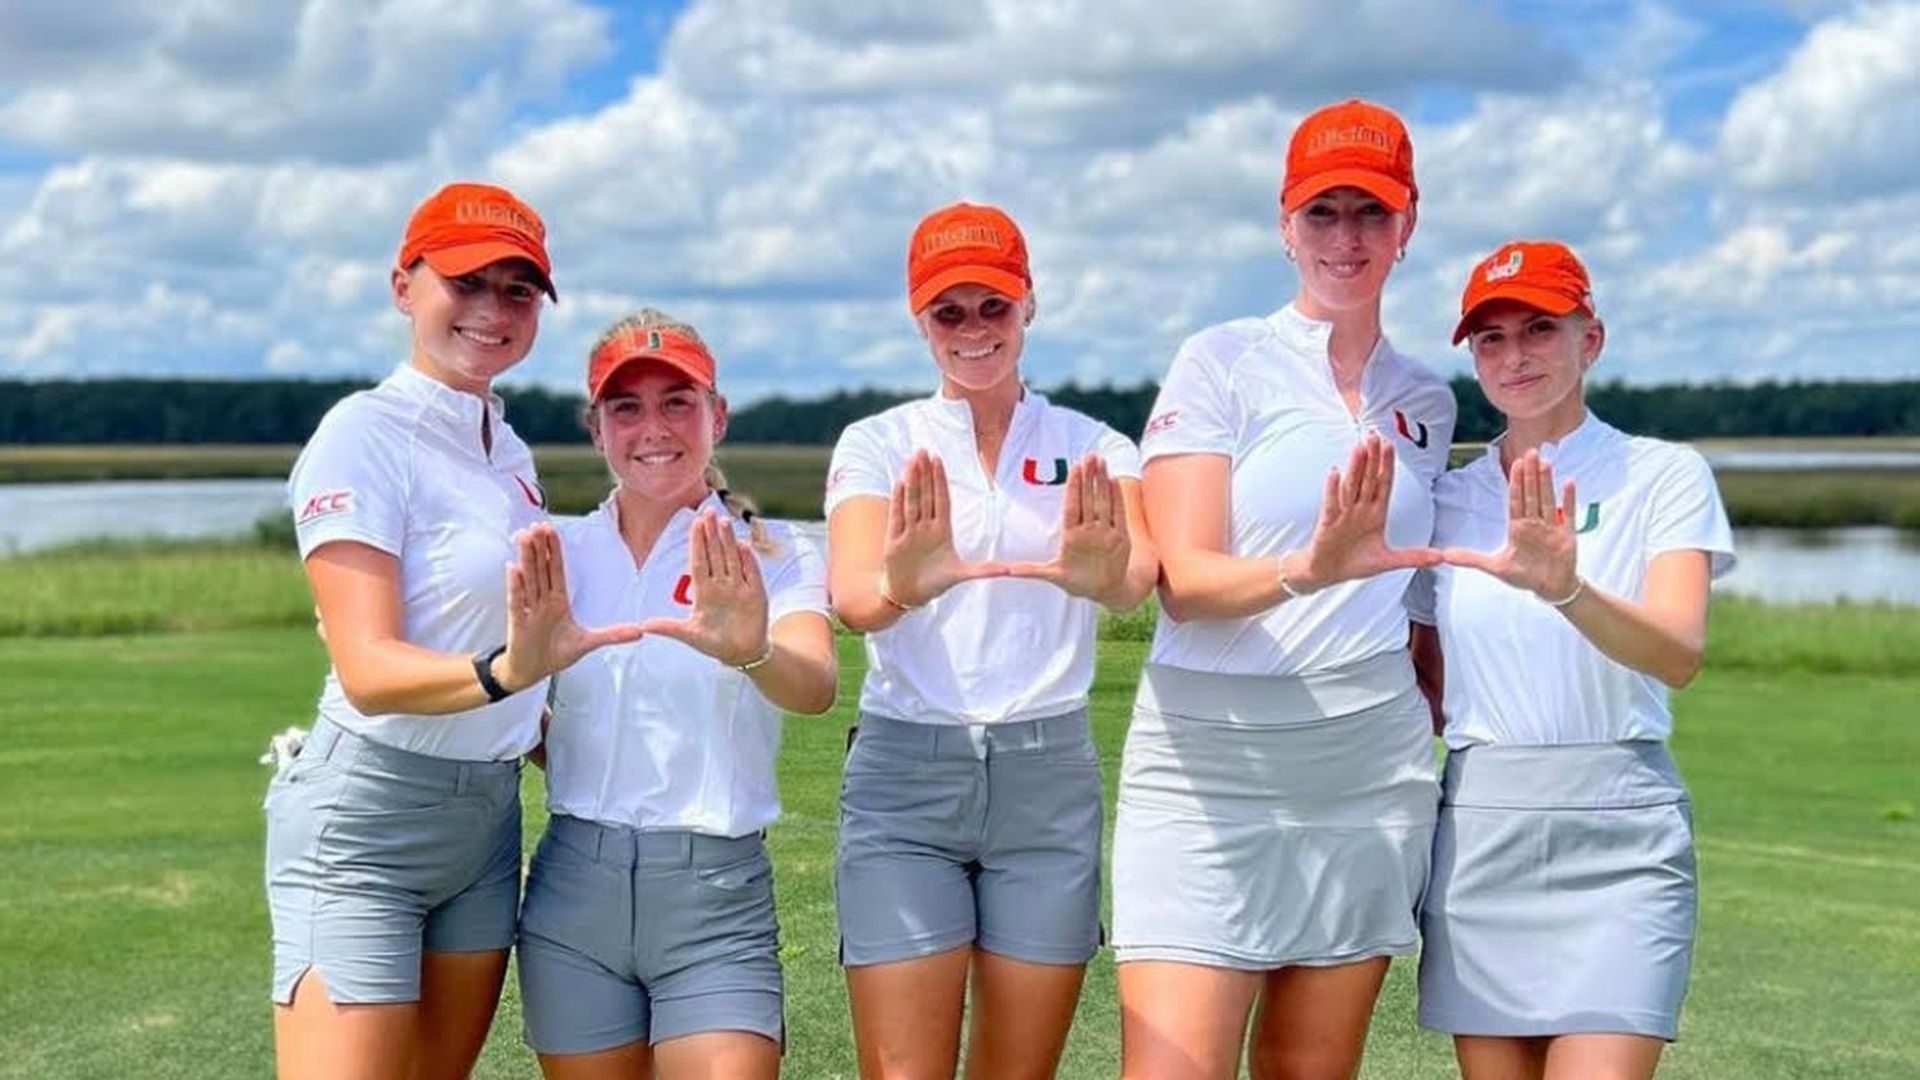 Miami Places Fifth at Cougar Classic